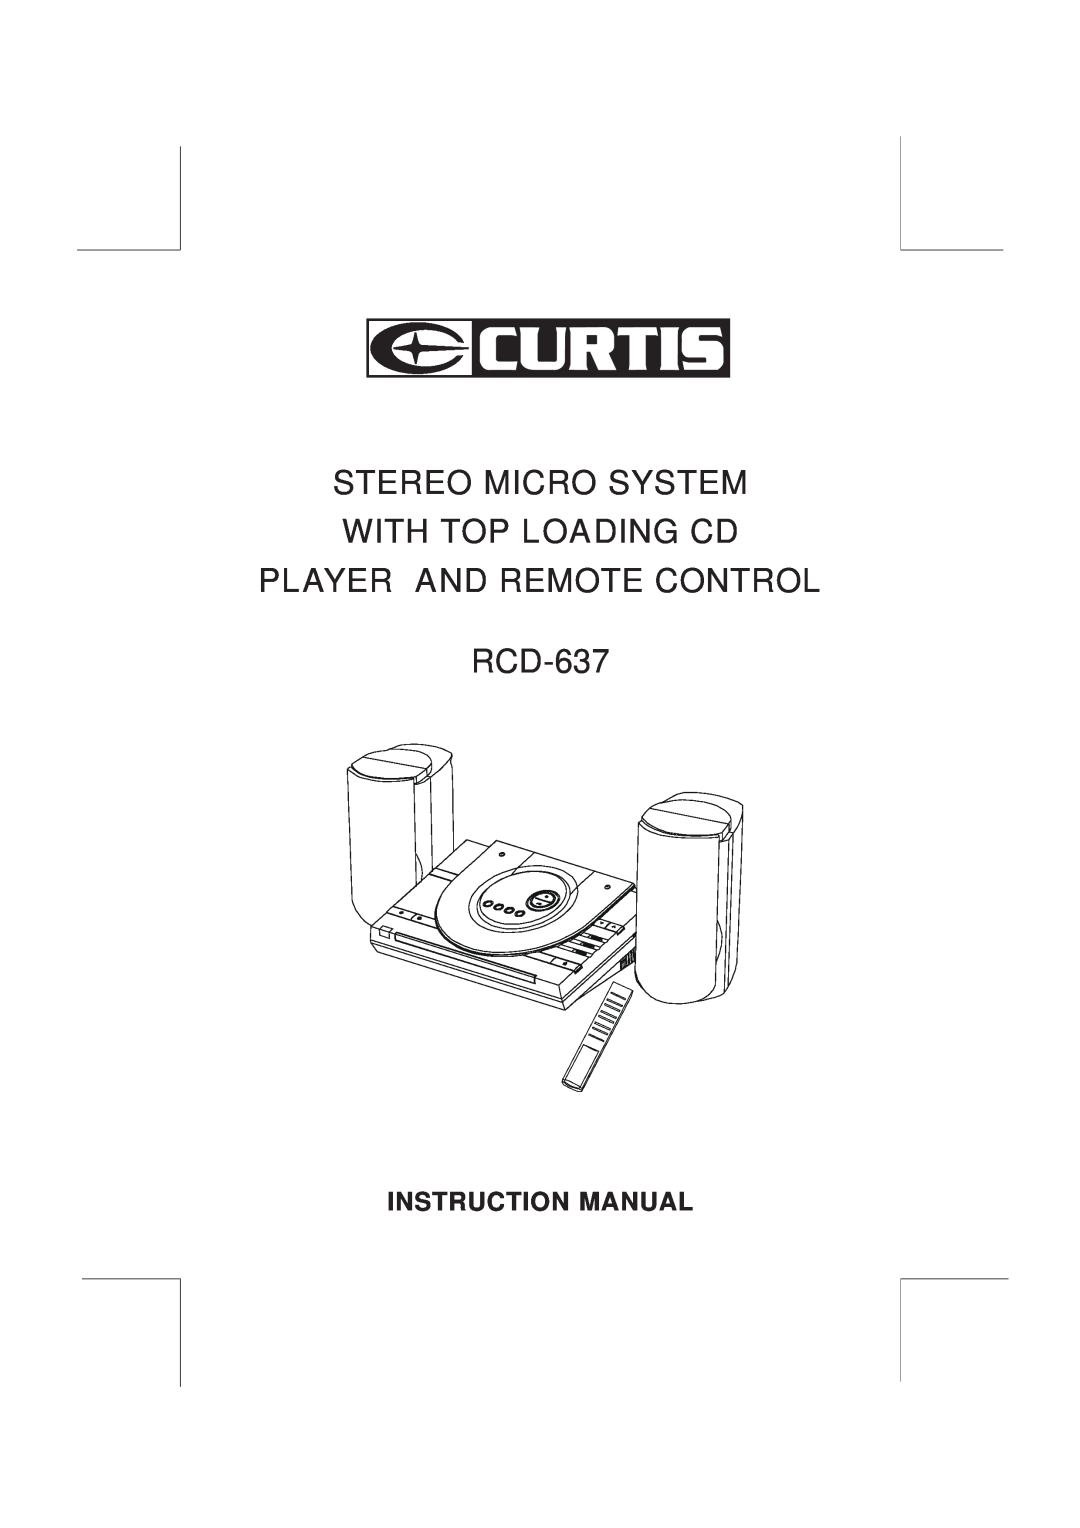 Curtis instruction manual Stereo Micro System With Top Loading Cd, PLAYER AND REMOTE CONTROL RCD-637 